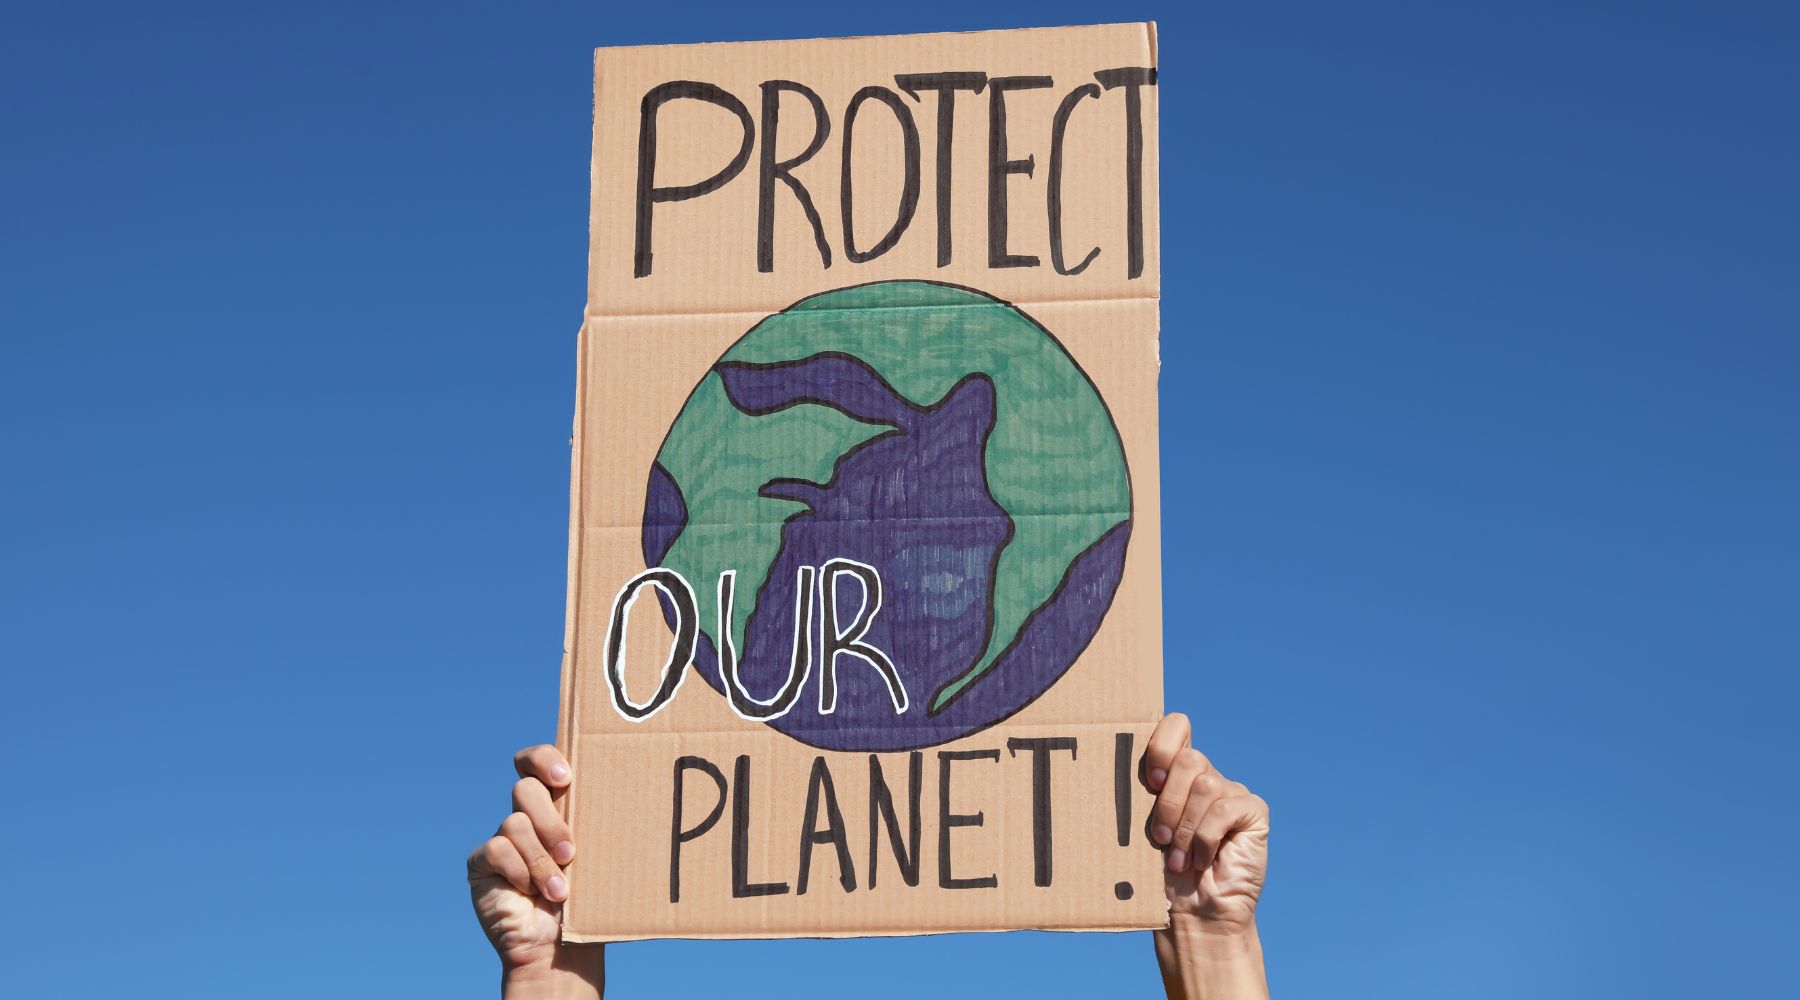 Protect the Planet